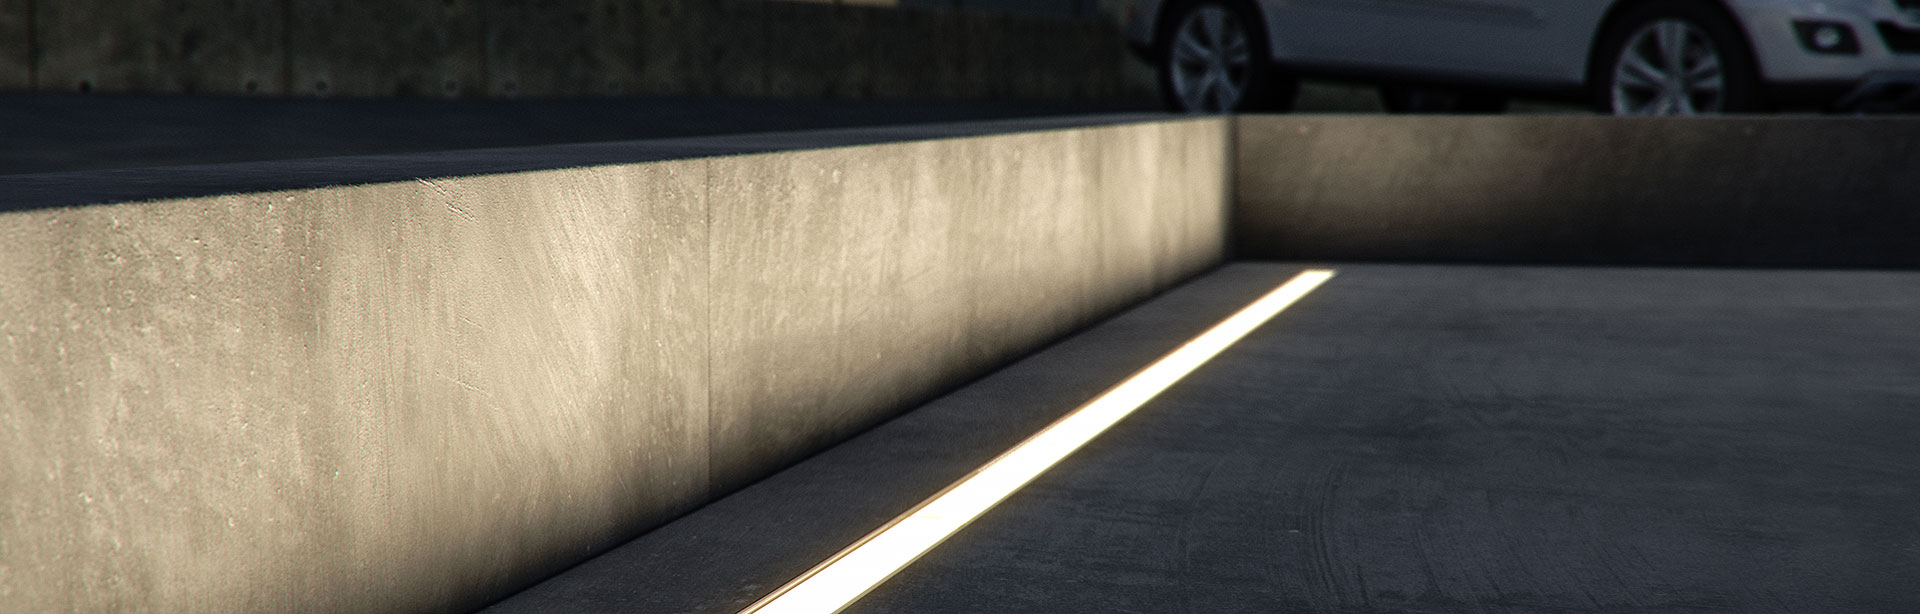 Interra is an IP67 in-ground luminaire available in various lengths and colour temperatures. Interra is designed to allow multiple units to be placed end-to-end and produce continuous illumination void of obvious breaks.